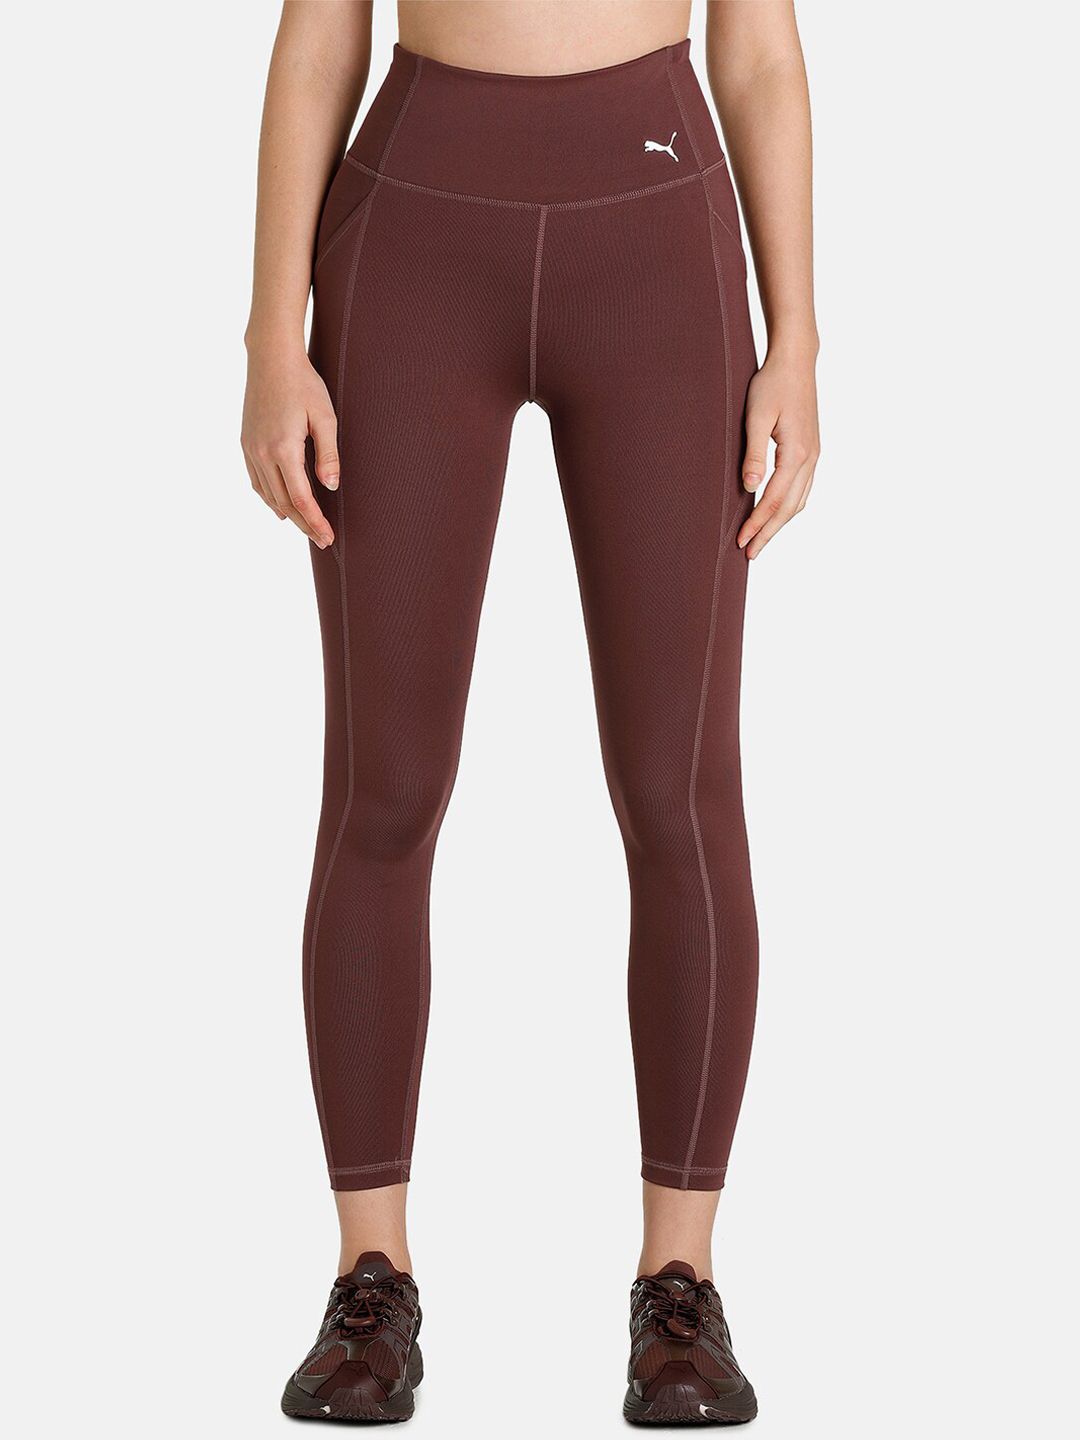 Puma Women Brown Solid Favourite Forever High Waist 7/8 Training Tights Price in India